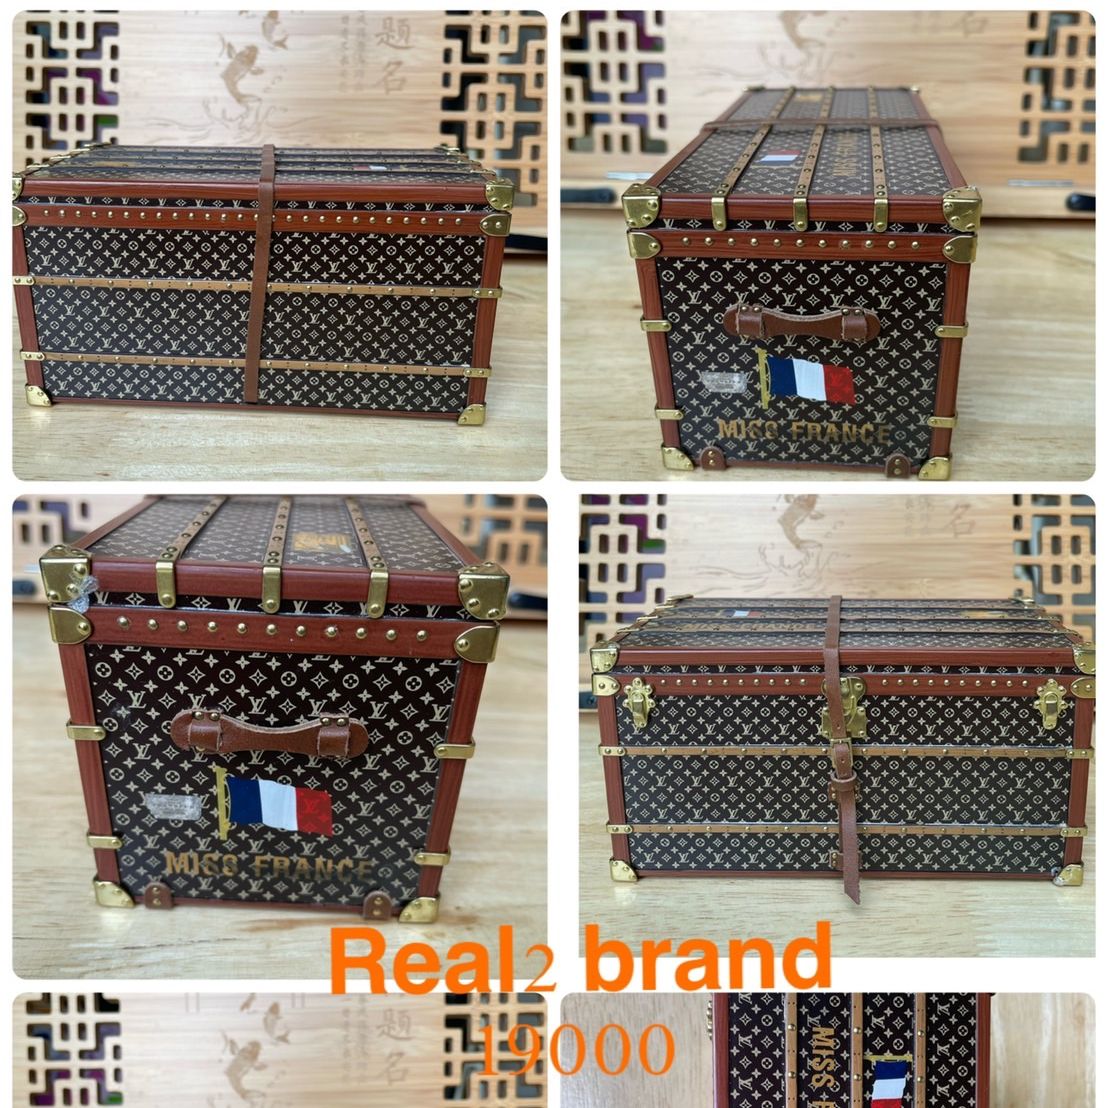 A LIMITED EDITION MISS FRANCE PAPERWEIGHT TRUNK, LOUIS VUITTON